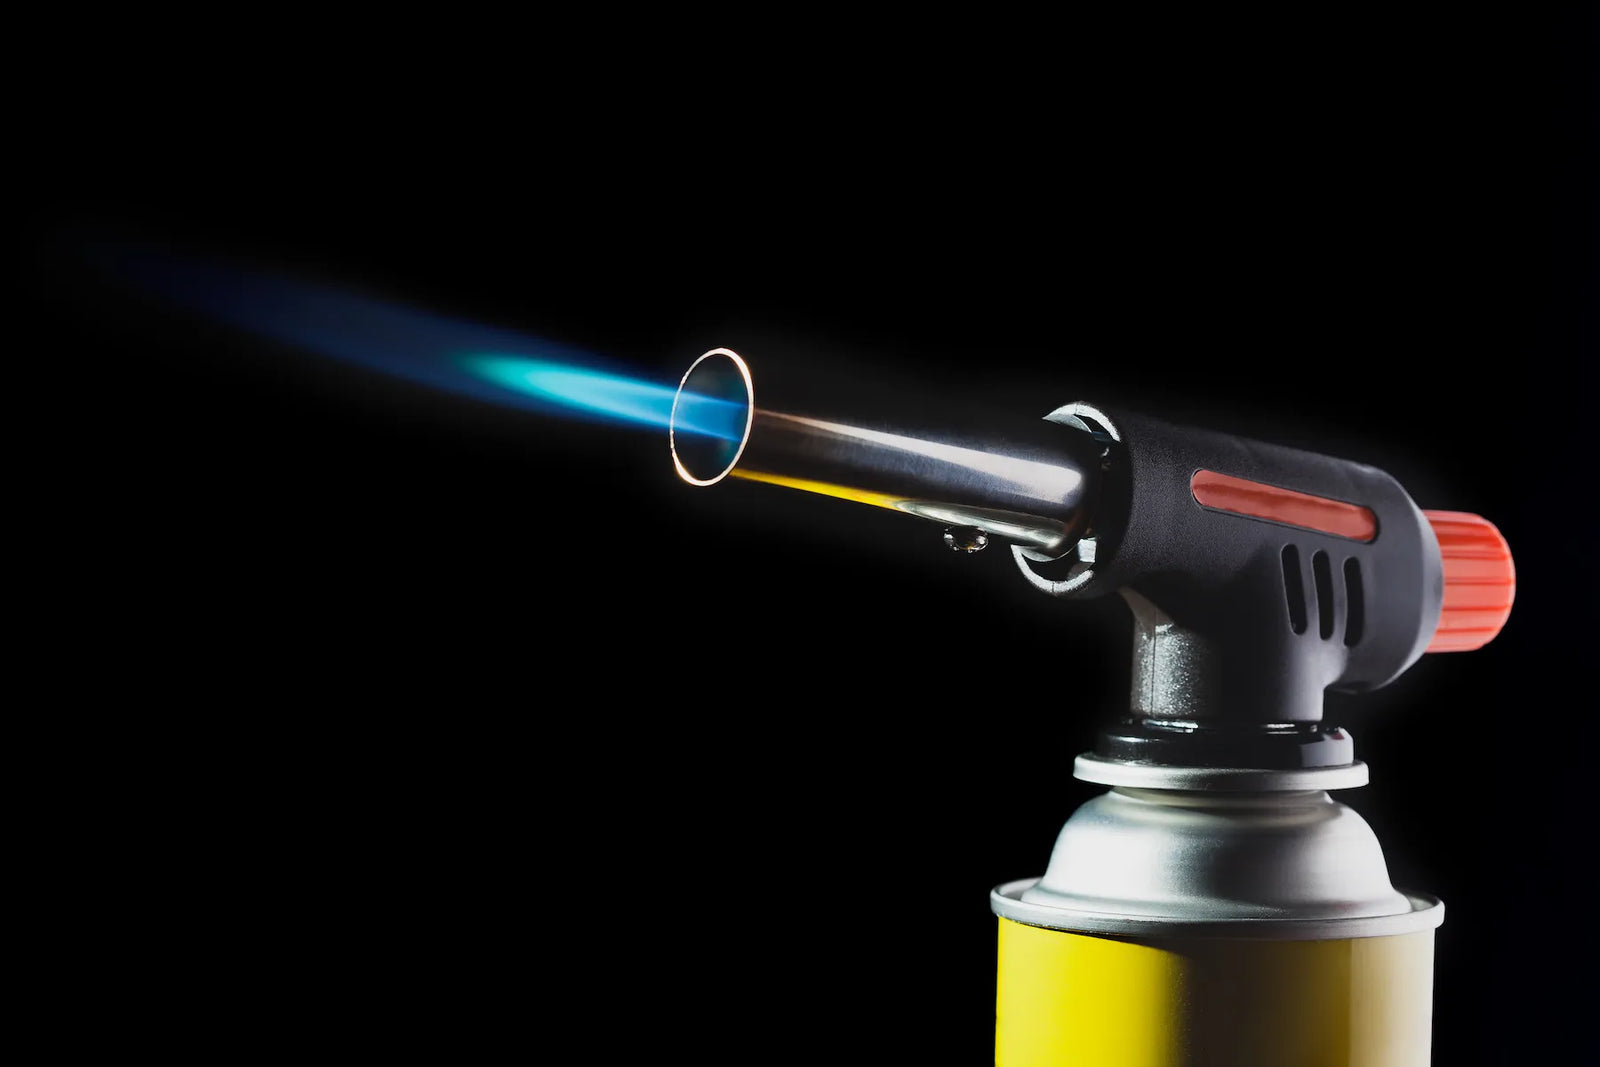 How to Fill a Butane Torch: Step-by-Step Guide